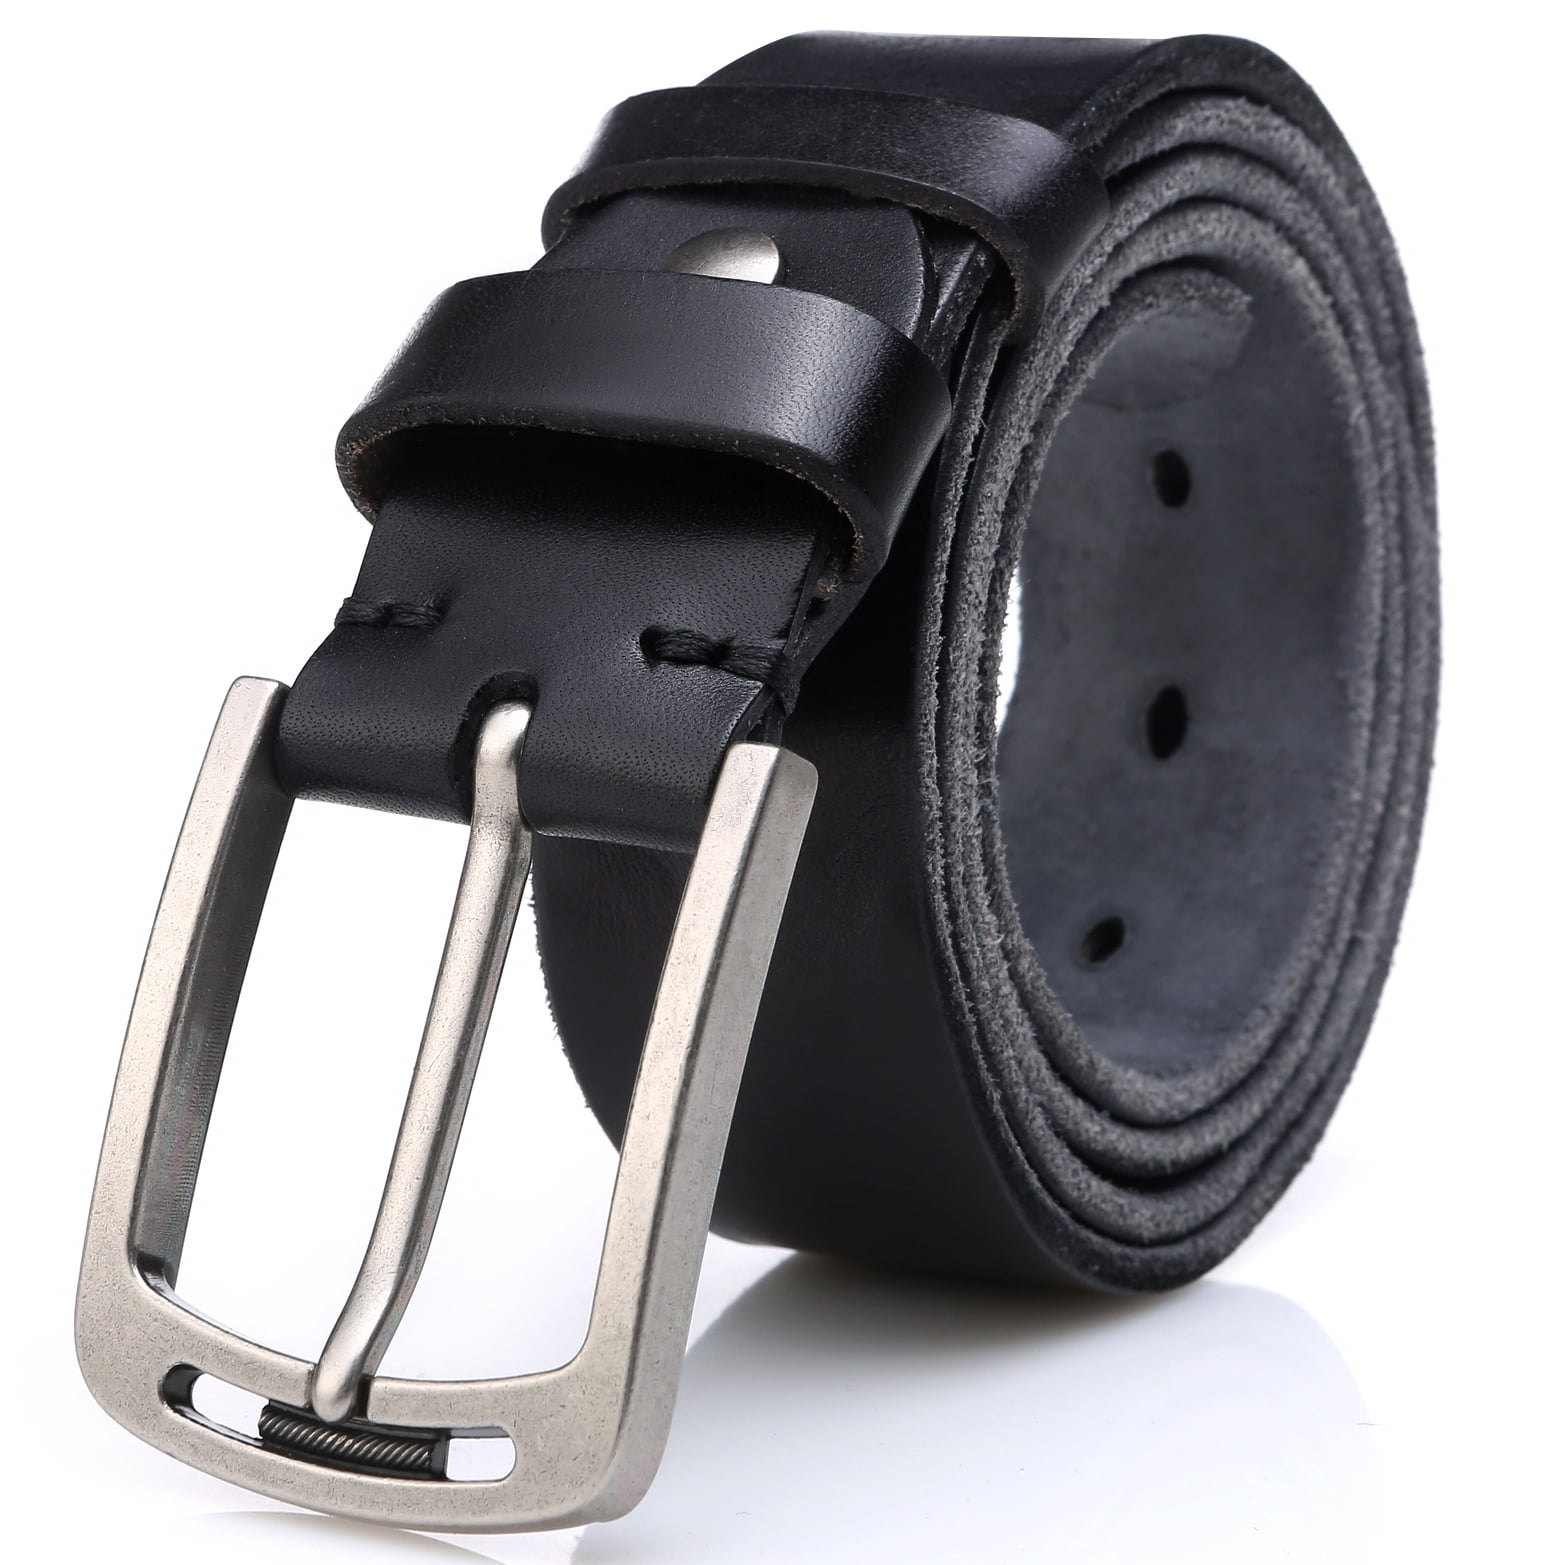 KEECOW Men's 100% Italian Cow Leather Belt Men with Anti-Scratch Buckle,Packed in A Box